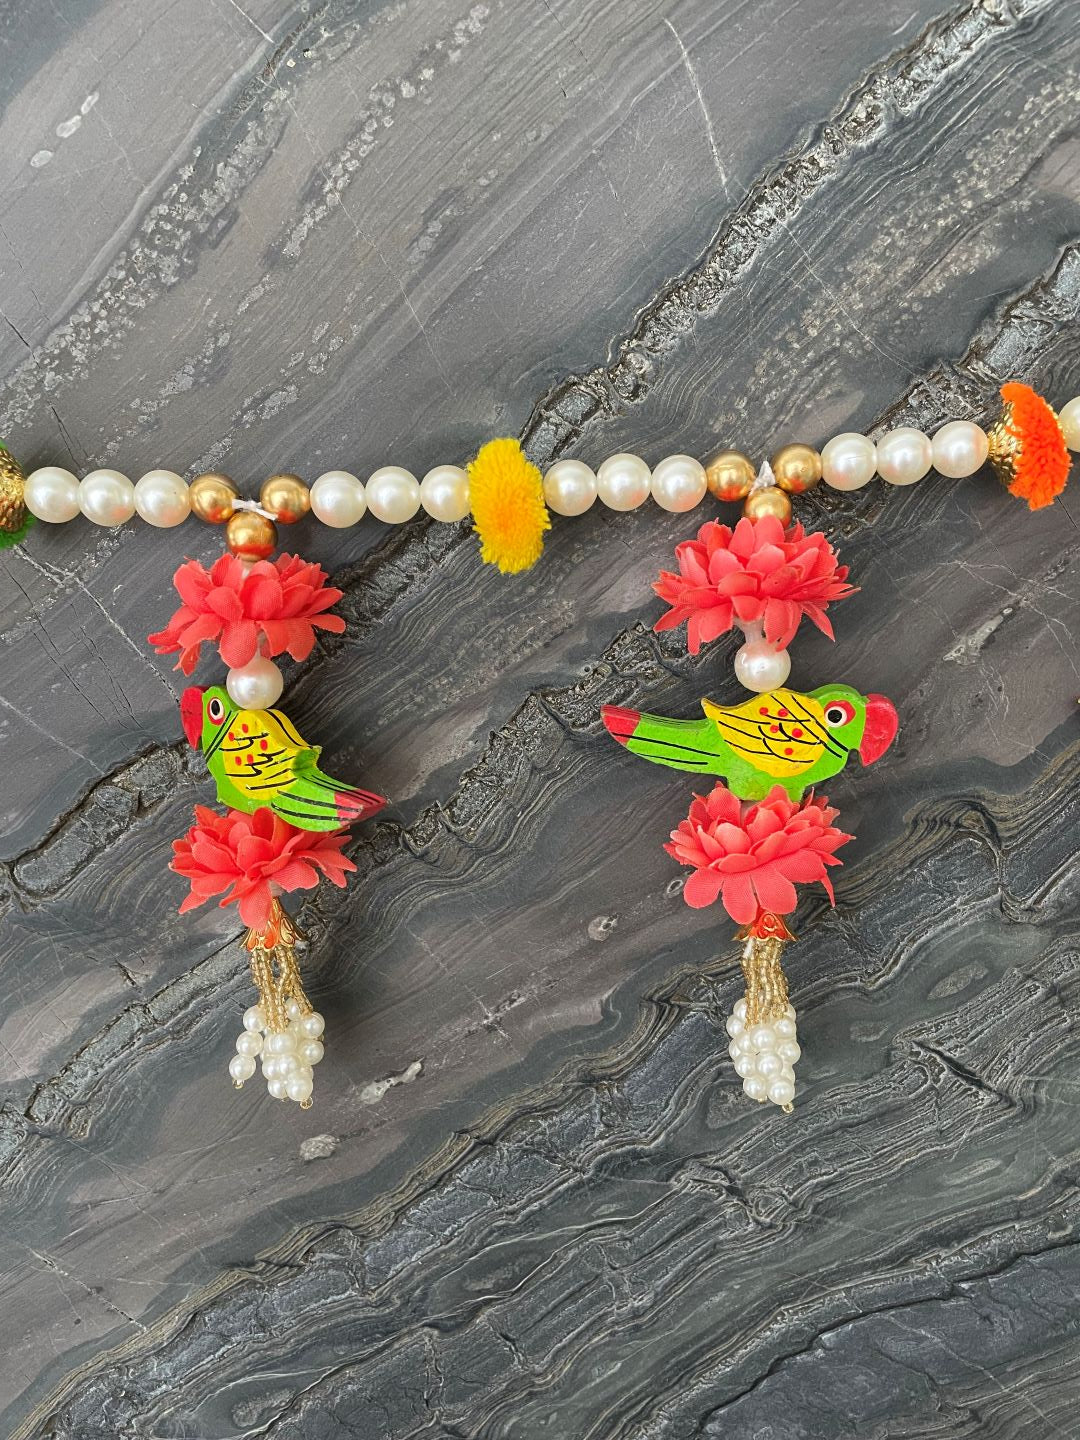 image for Gold & Pearl Beads With Orange flower & Parrots Toran For Door Hangings Diwali Decoration